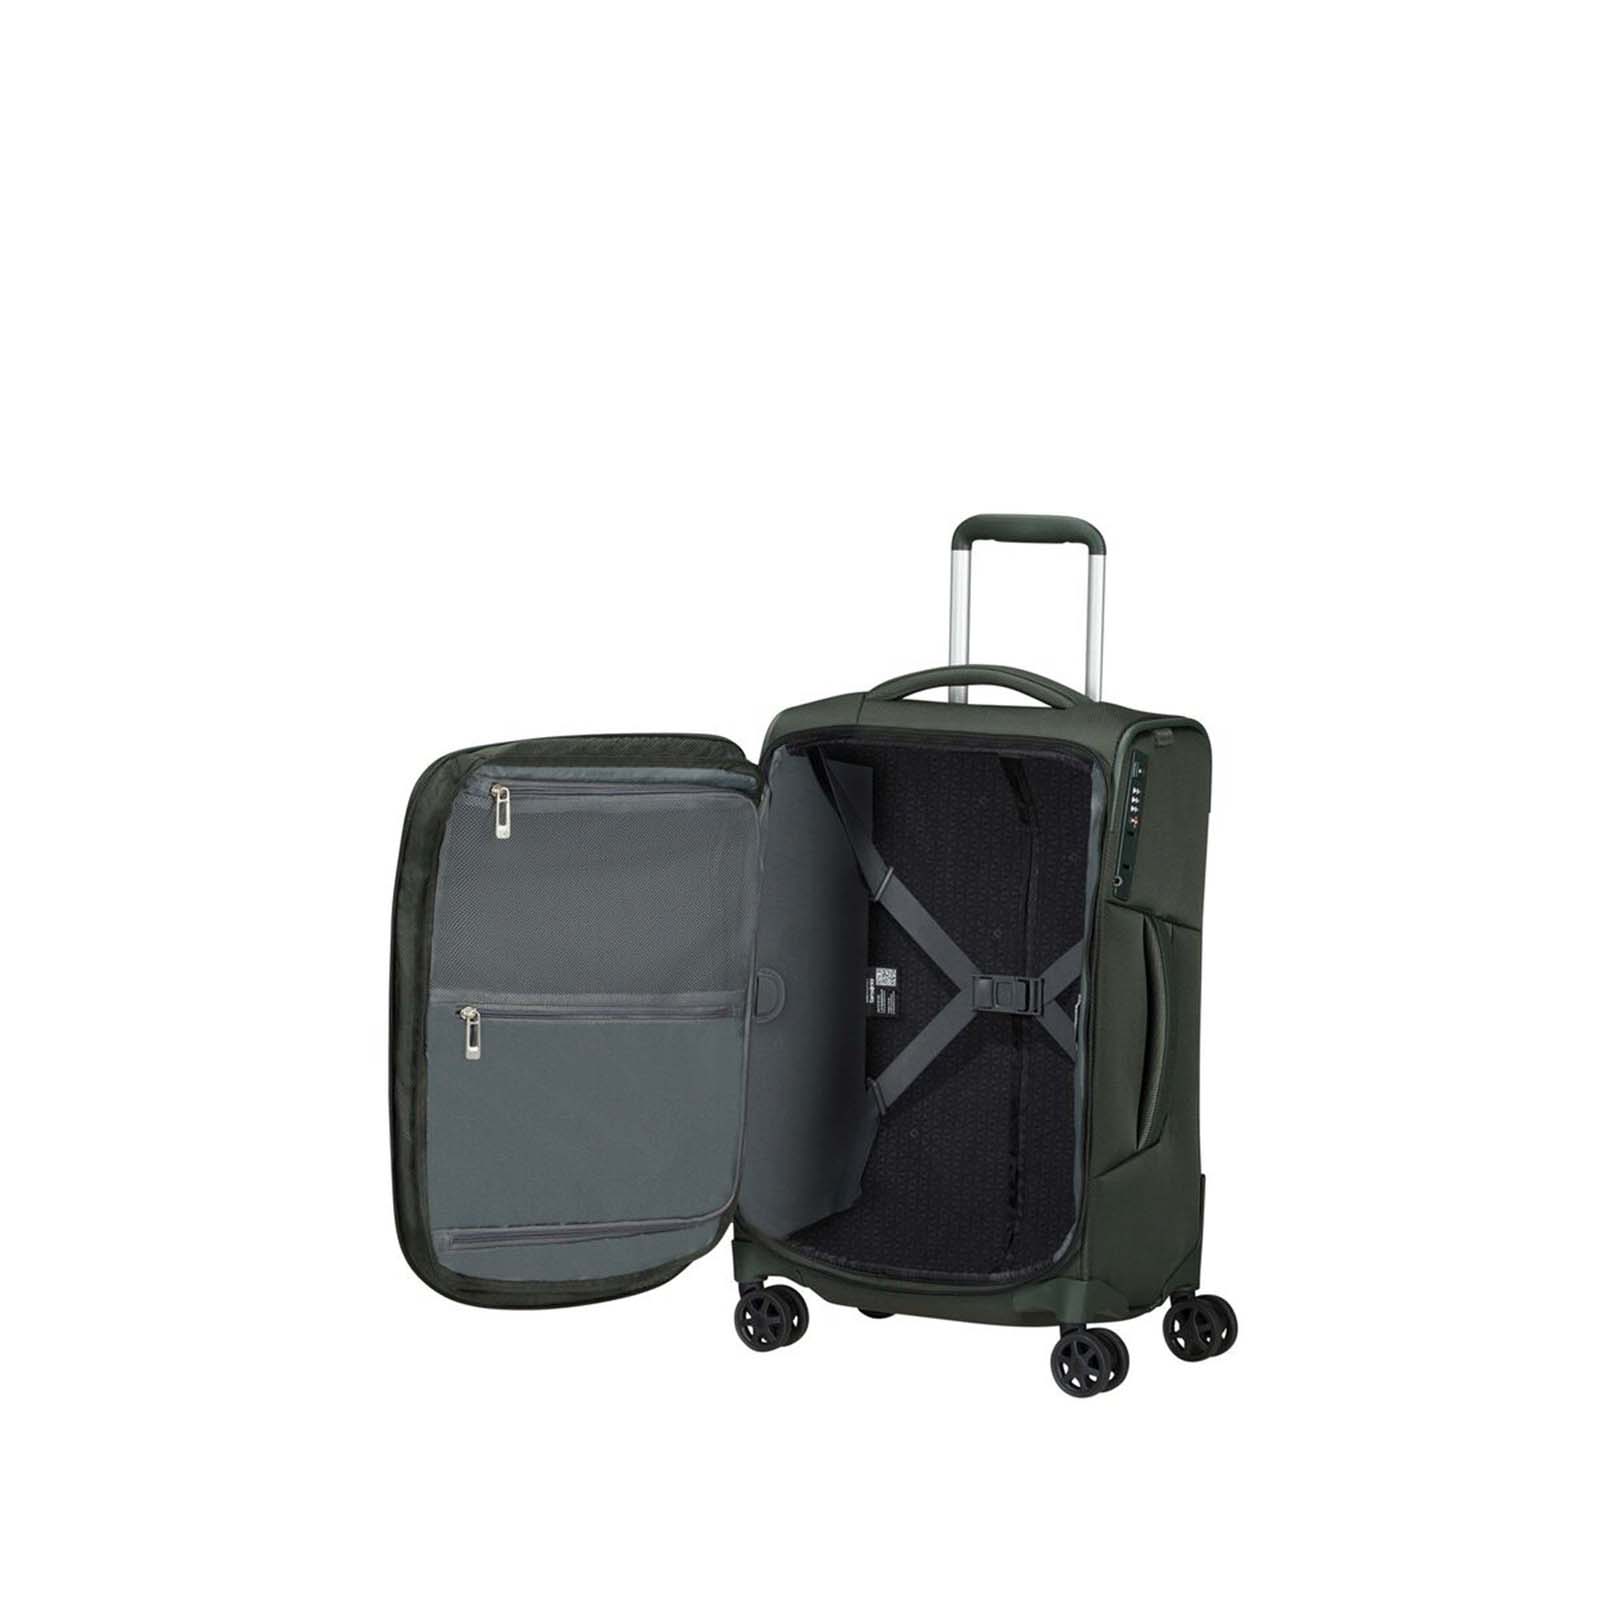 Samsonite-Respark-55cm-Carry-On-Suitcase-Forest-Green-Open